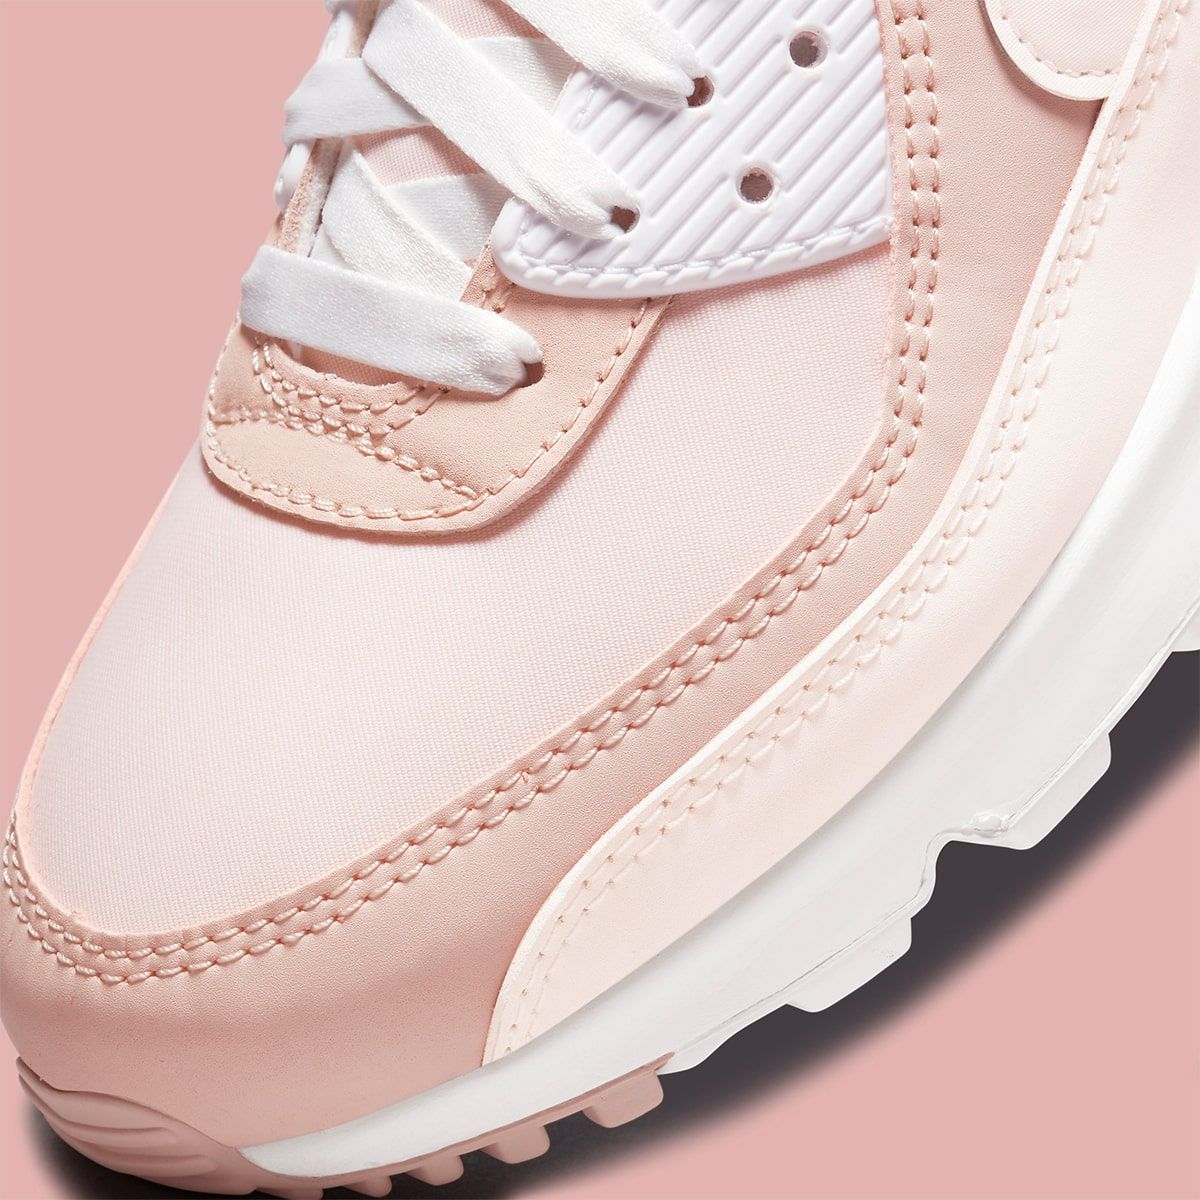 Available Now // Nike Air Max 90 “Pink Oxford” | House of Heat°